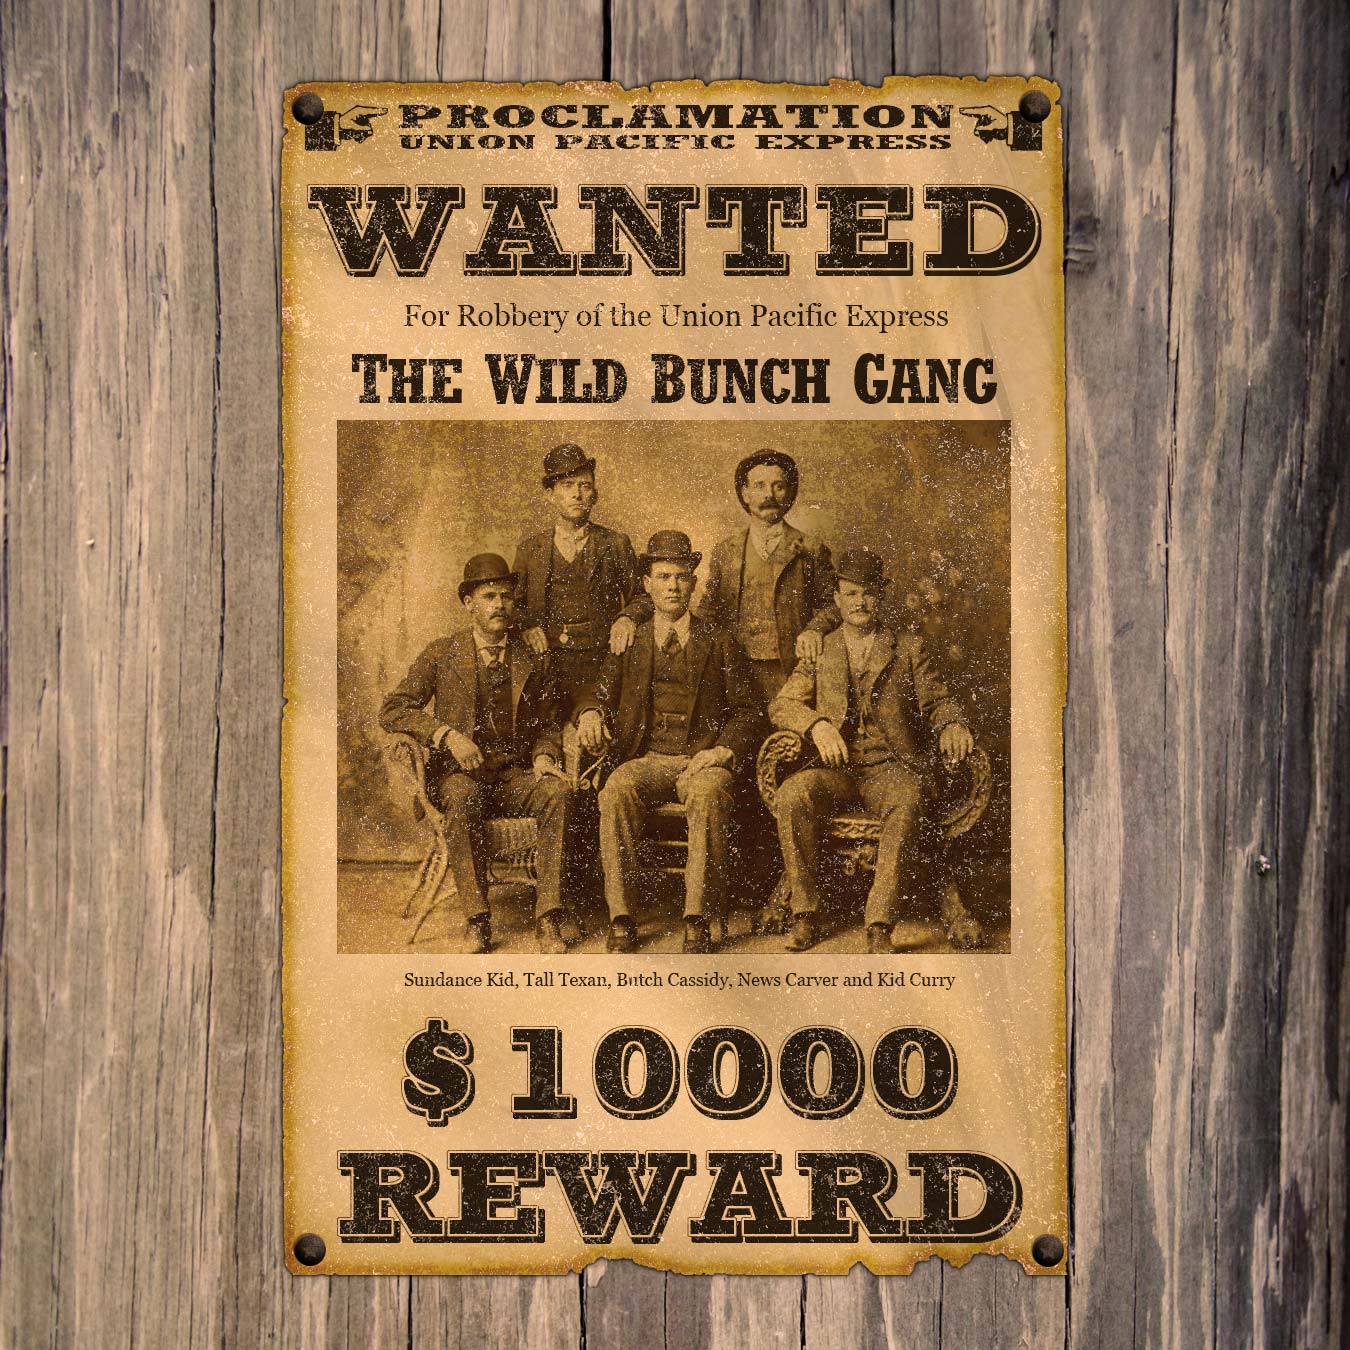 9 Western Wanted Font Word Images - Old West Wanted Poster Fonts Free